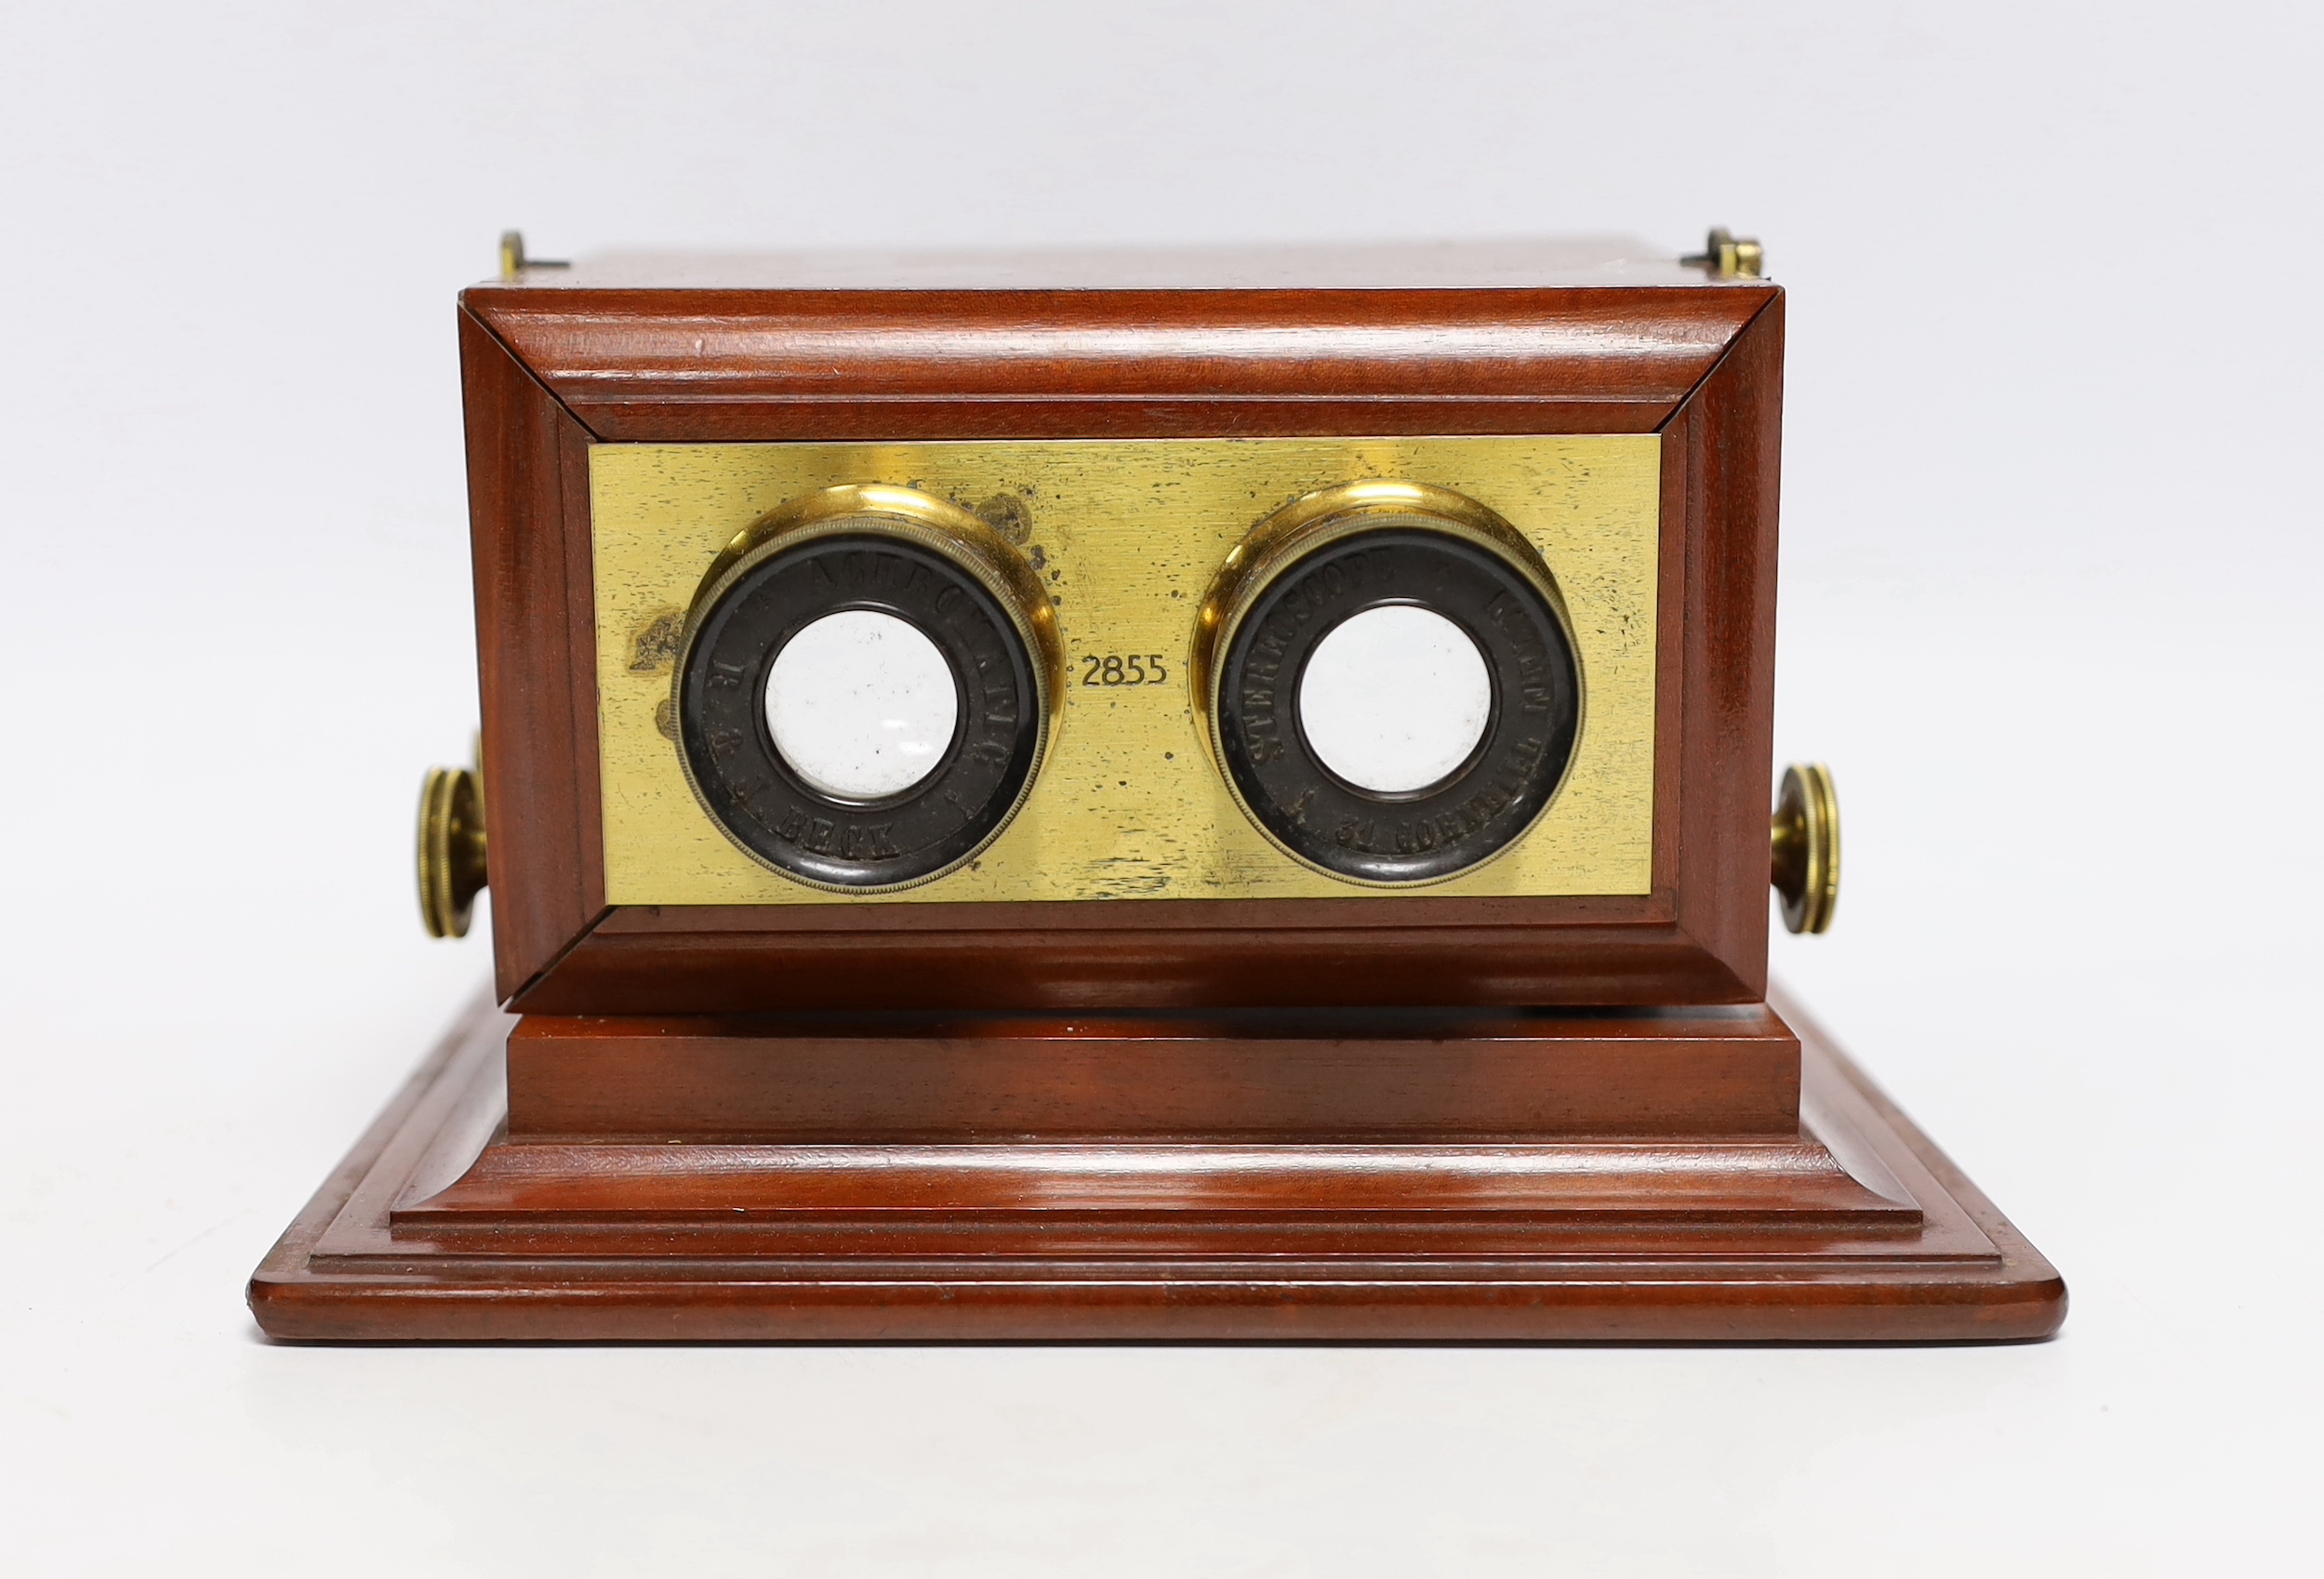 A Smith, Beck & Beck mahogany and brass stereoscope, c. 1860, 20.5cm x 18.5cm x 13.5cm (a.f.)